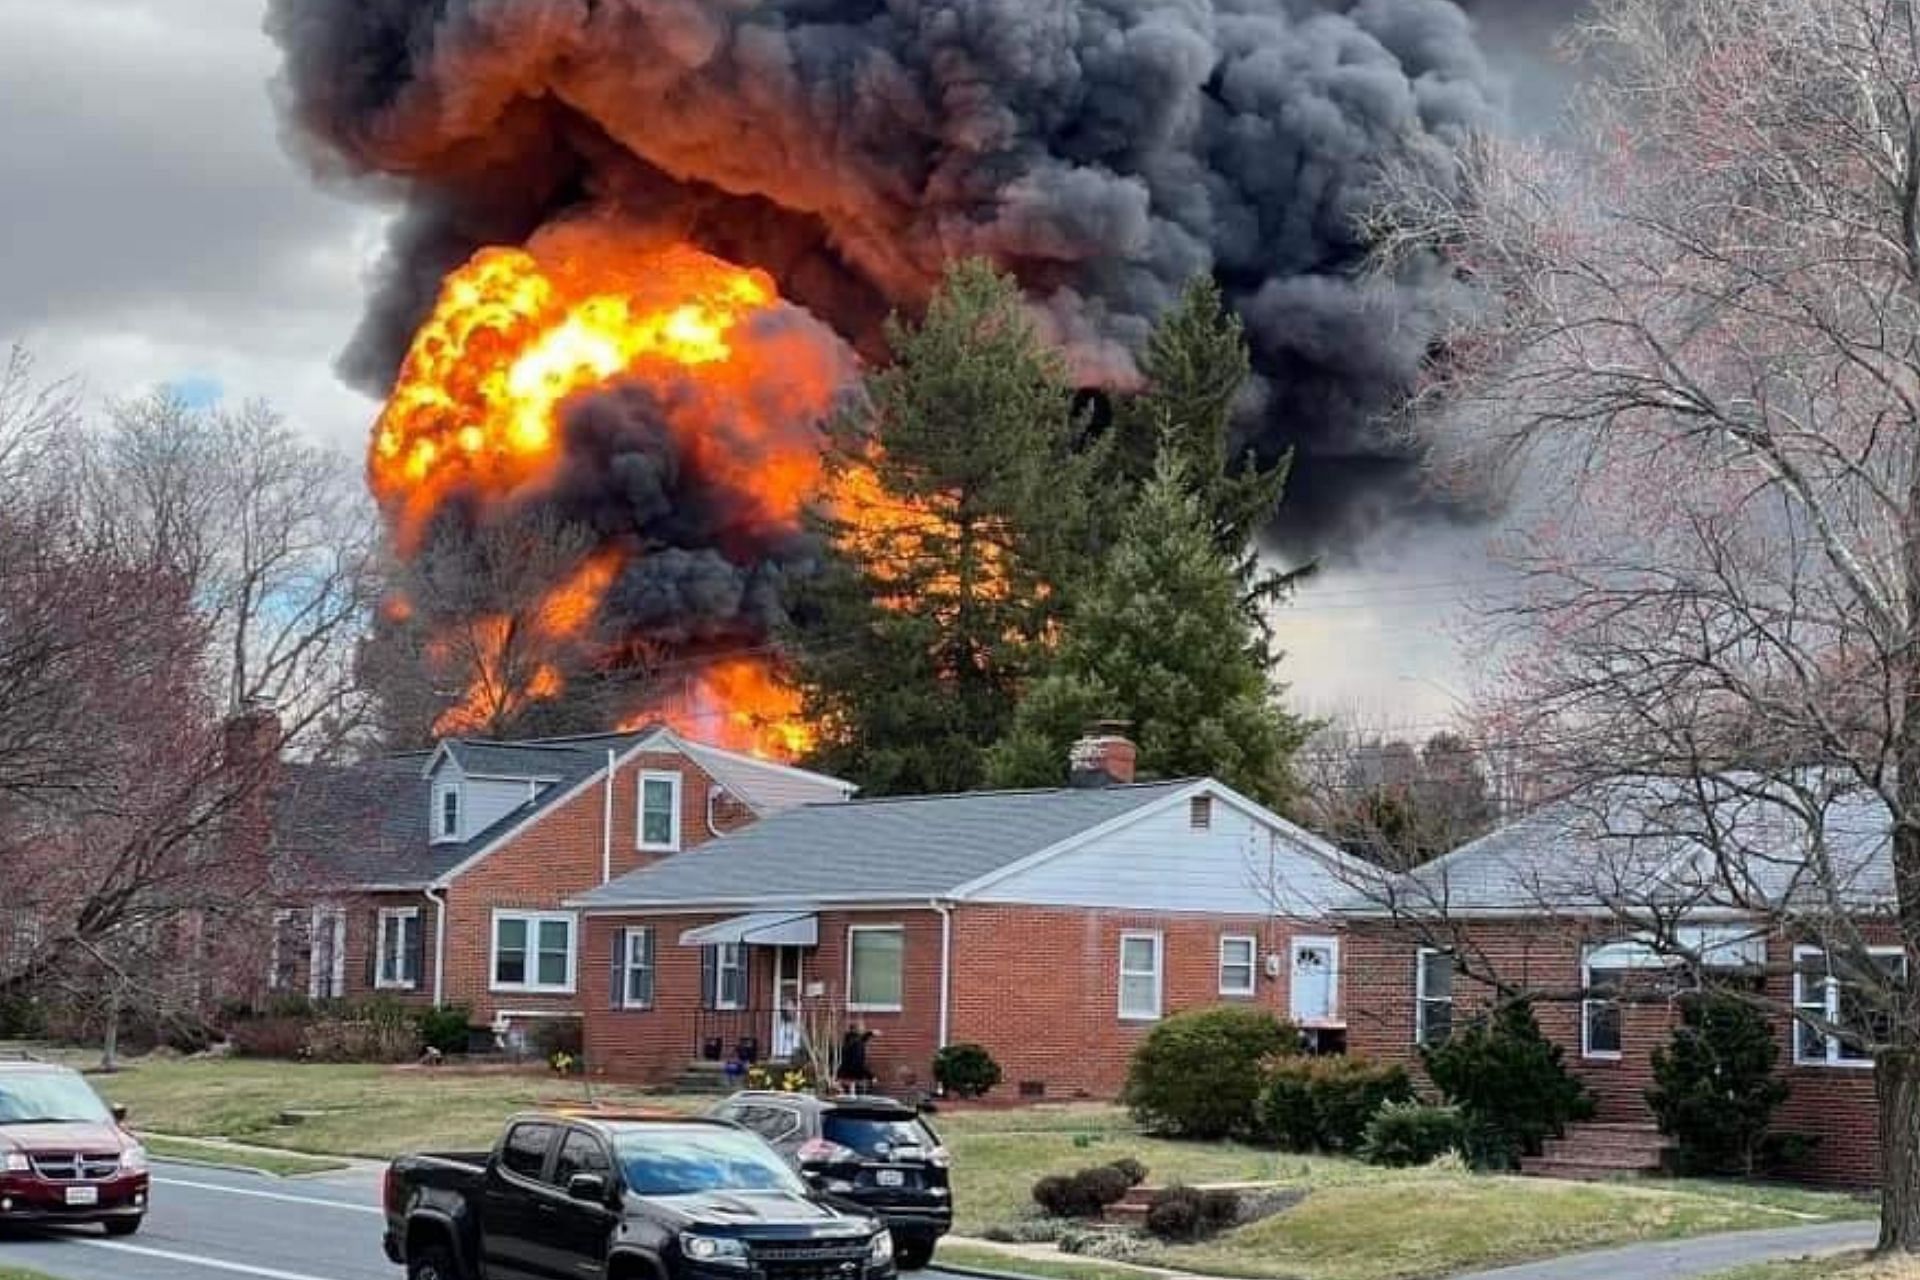 A gas tanker explodes after accident in Frederick, Maryland (Image via Twitter/@_frederickmd)